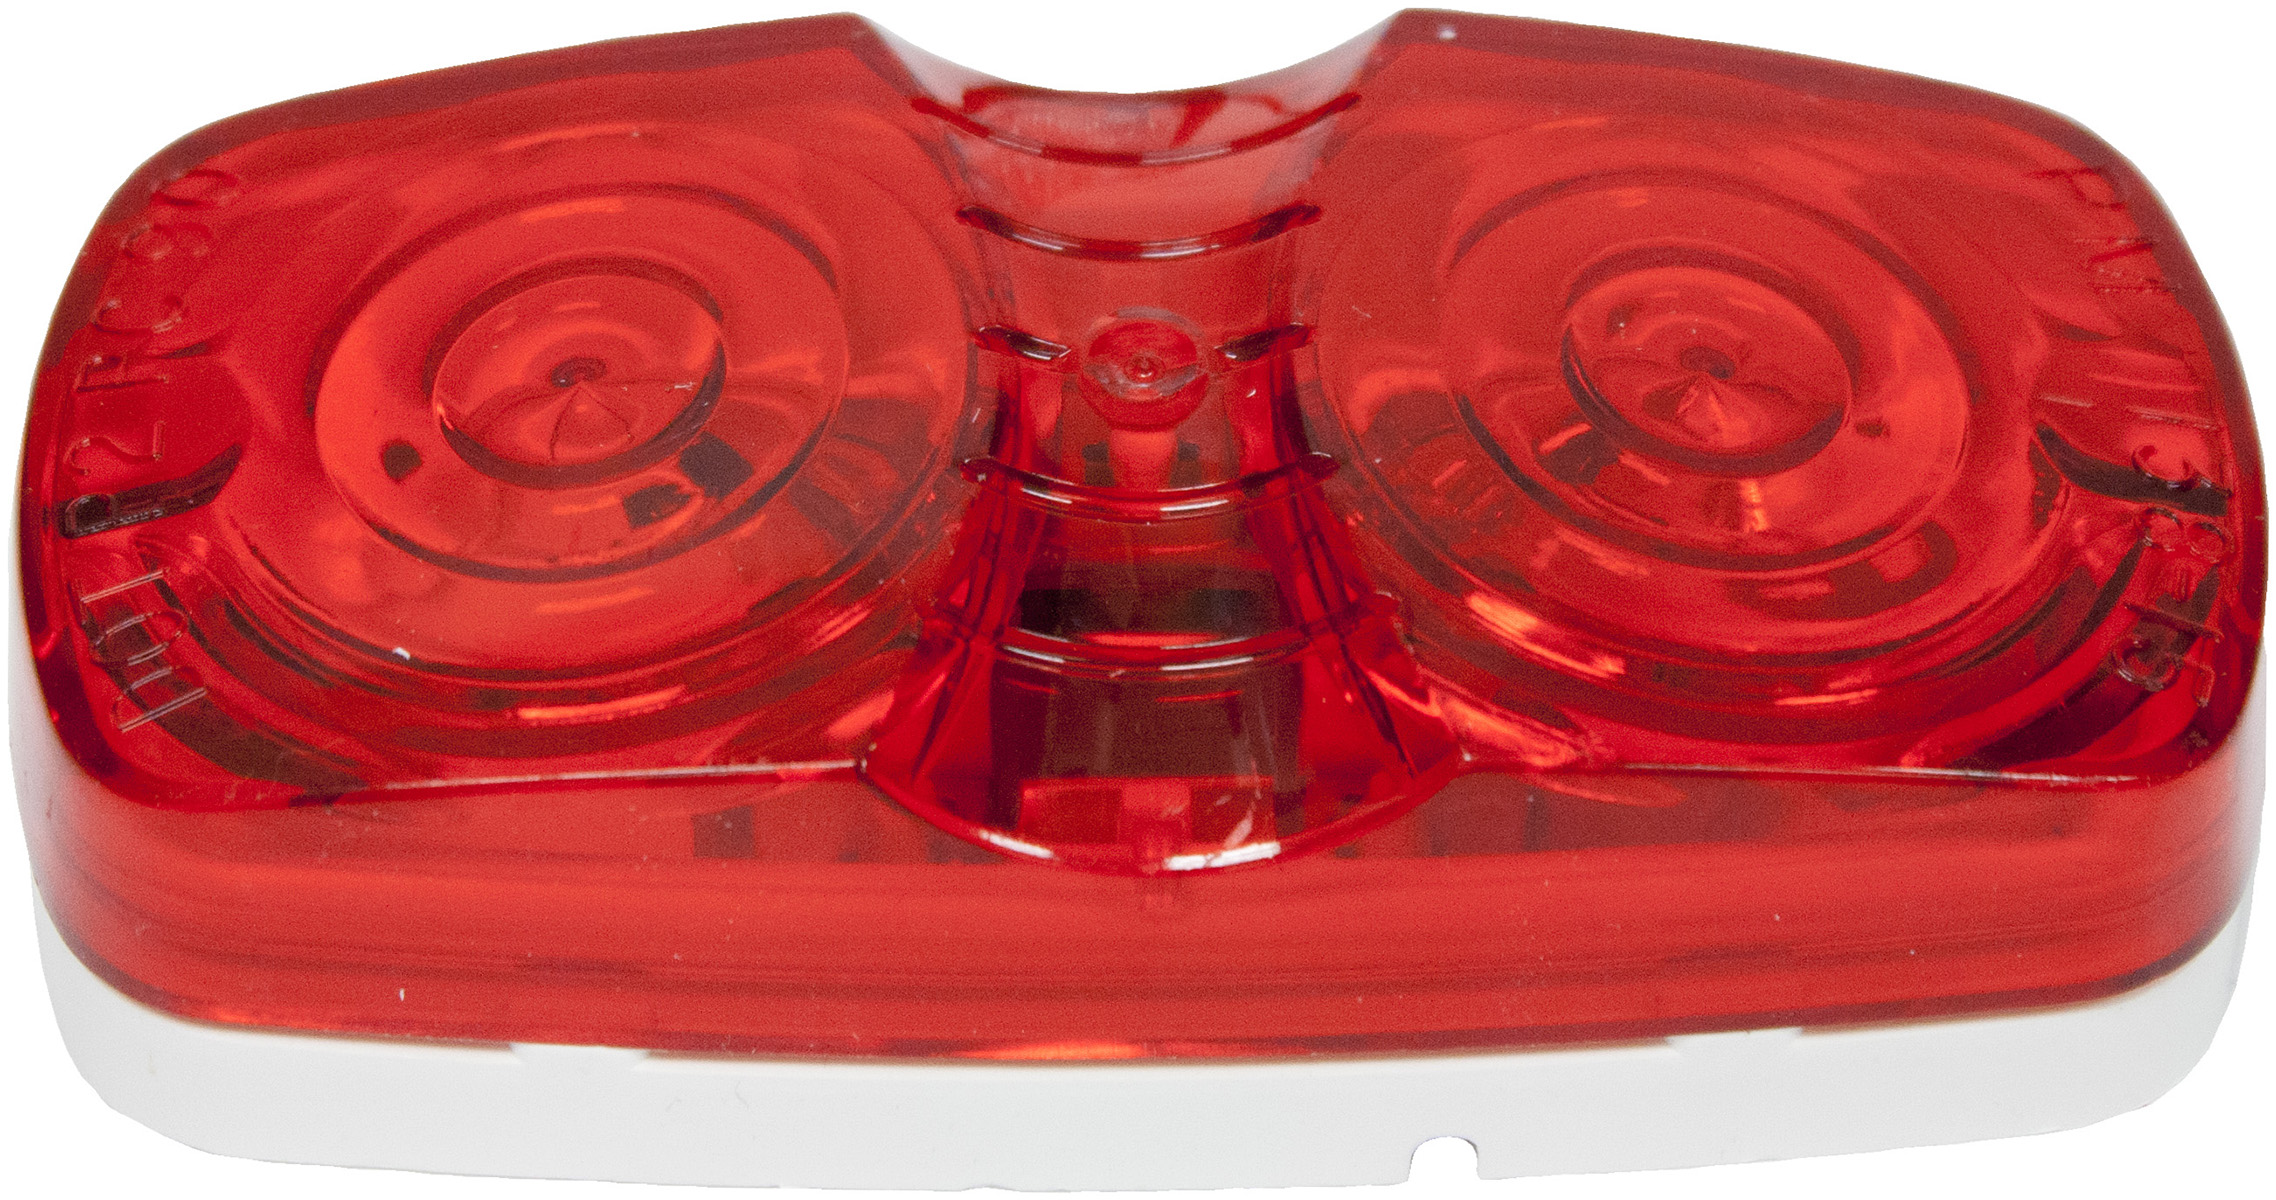 Peterson 138R Incandescent Red Marker/Clearace Light - 2-Bulb, Surface Mount, PC Rated, Vibar Socket